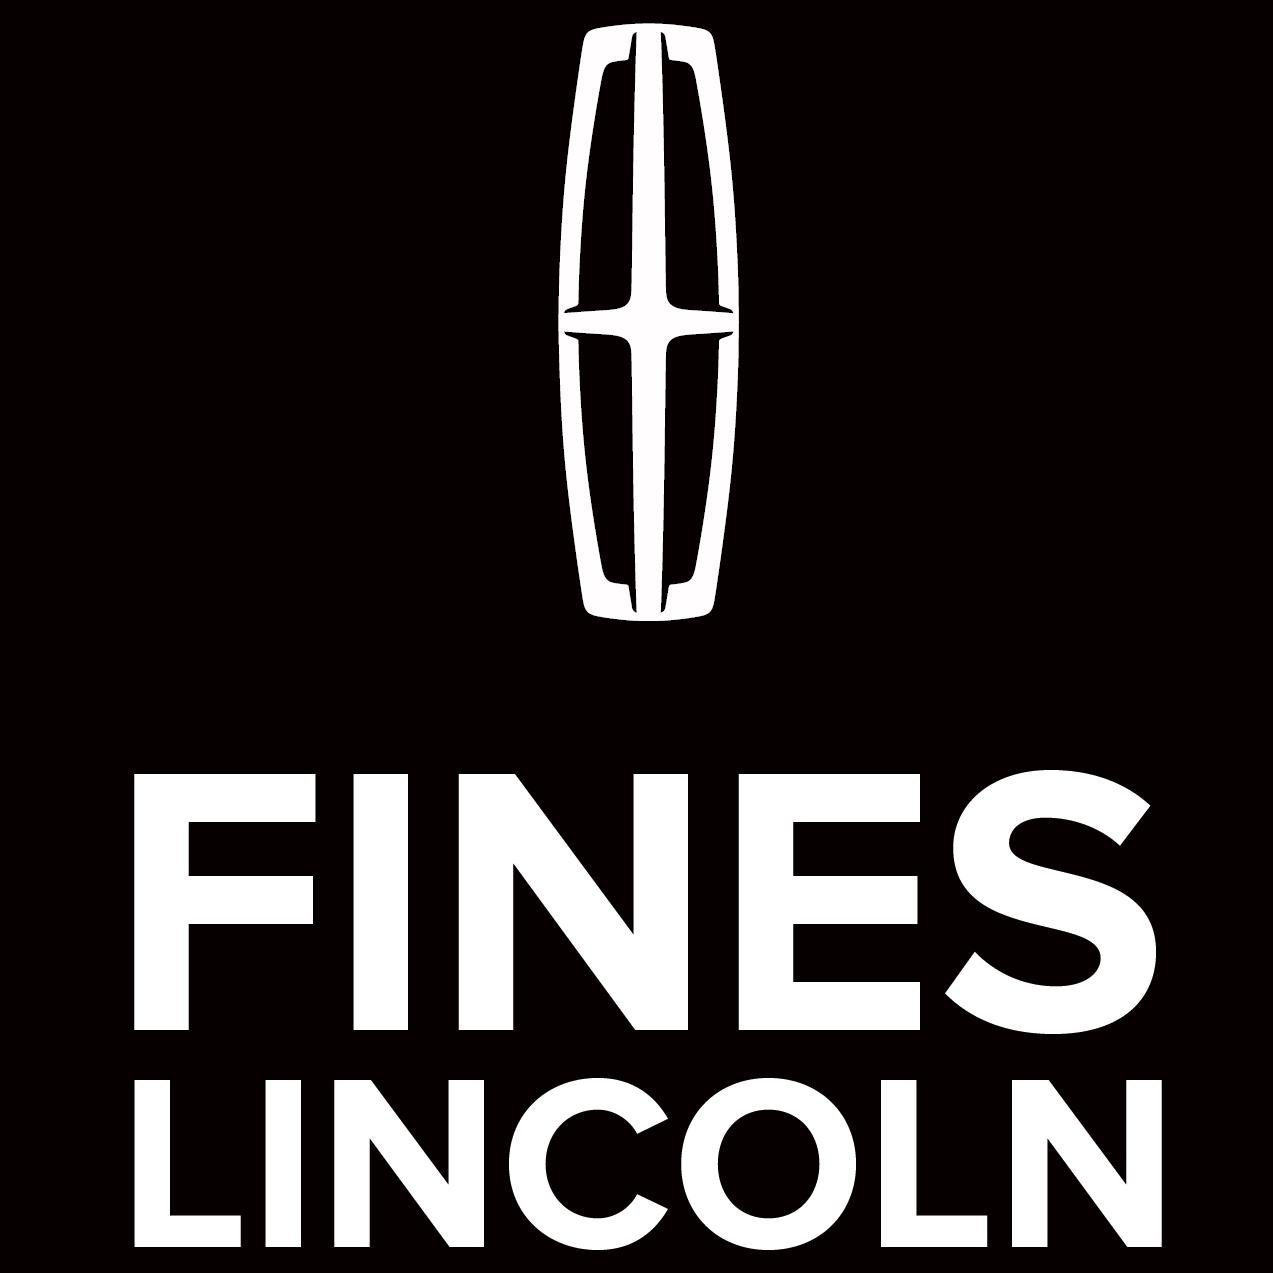 Since 1987, Fines Lincoln is Caledon's Lincoln dealer. Located on Highway 50, south of Bolton, ON - just 10 minutes north of Hwy 407 & 427 Phone: 905-857-1253